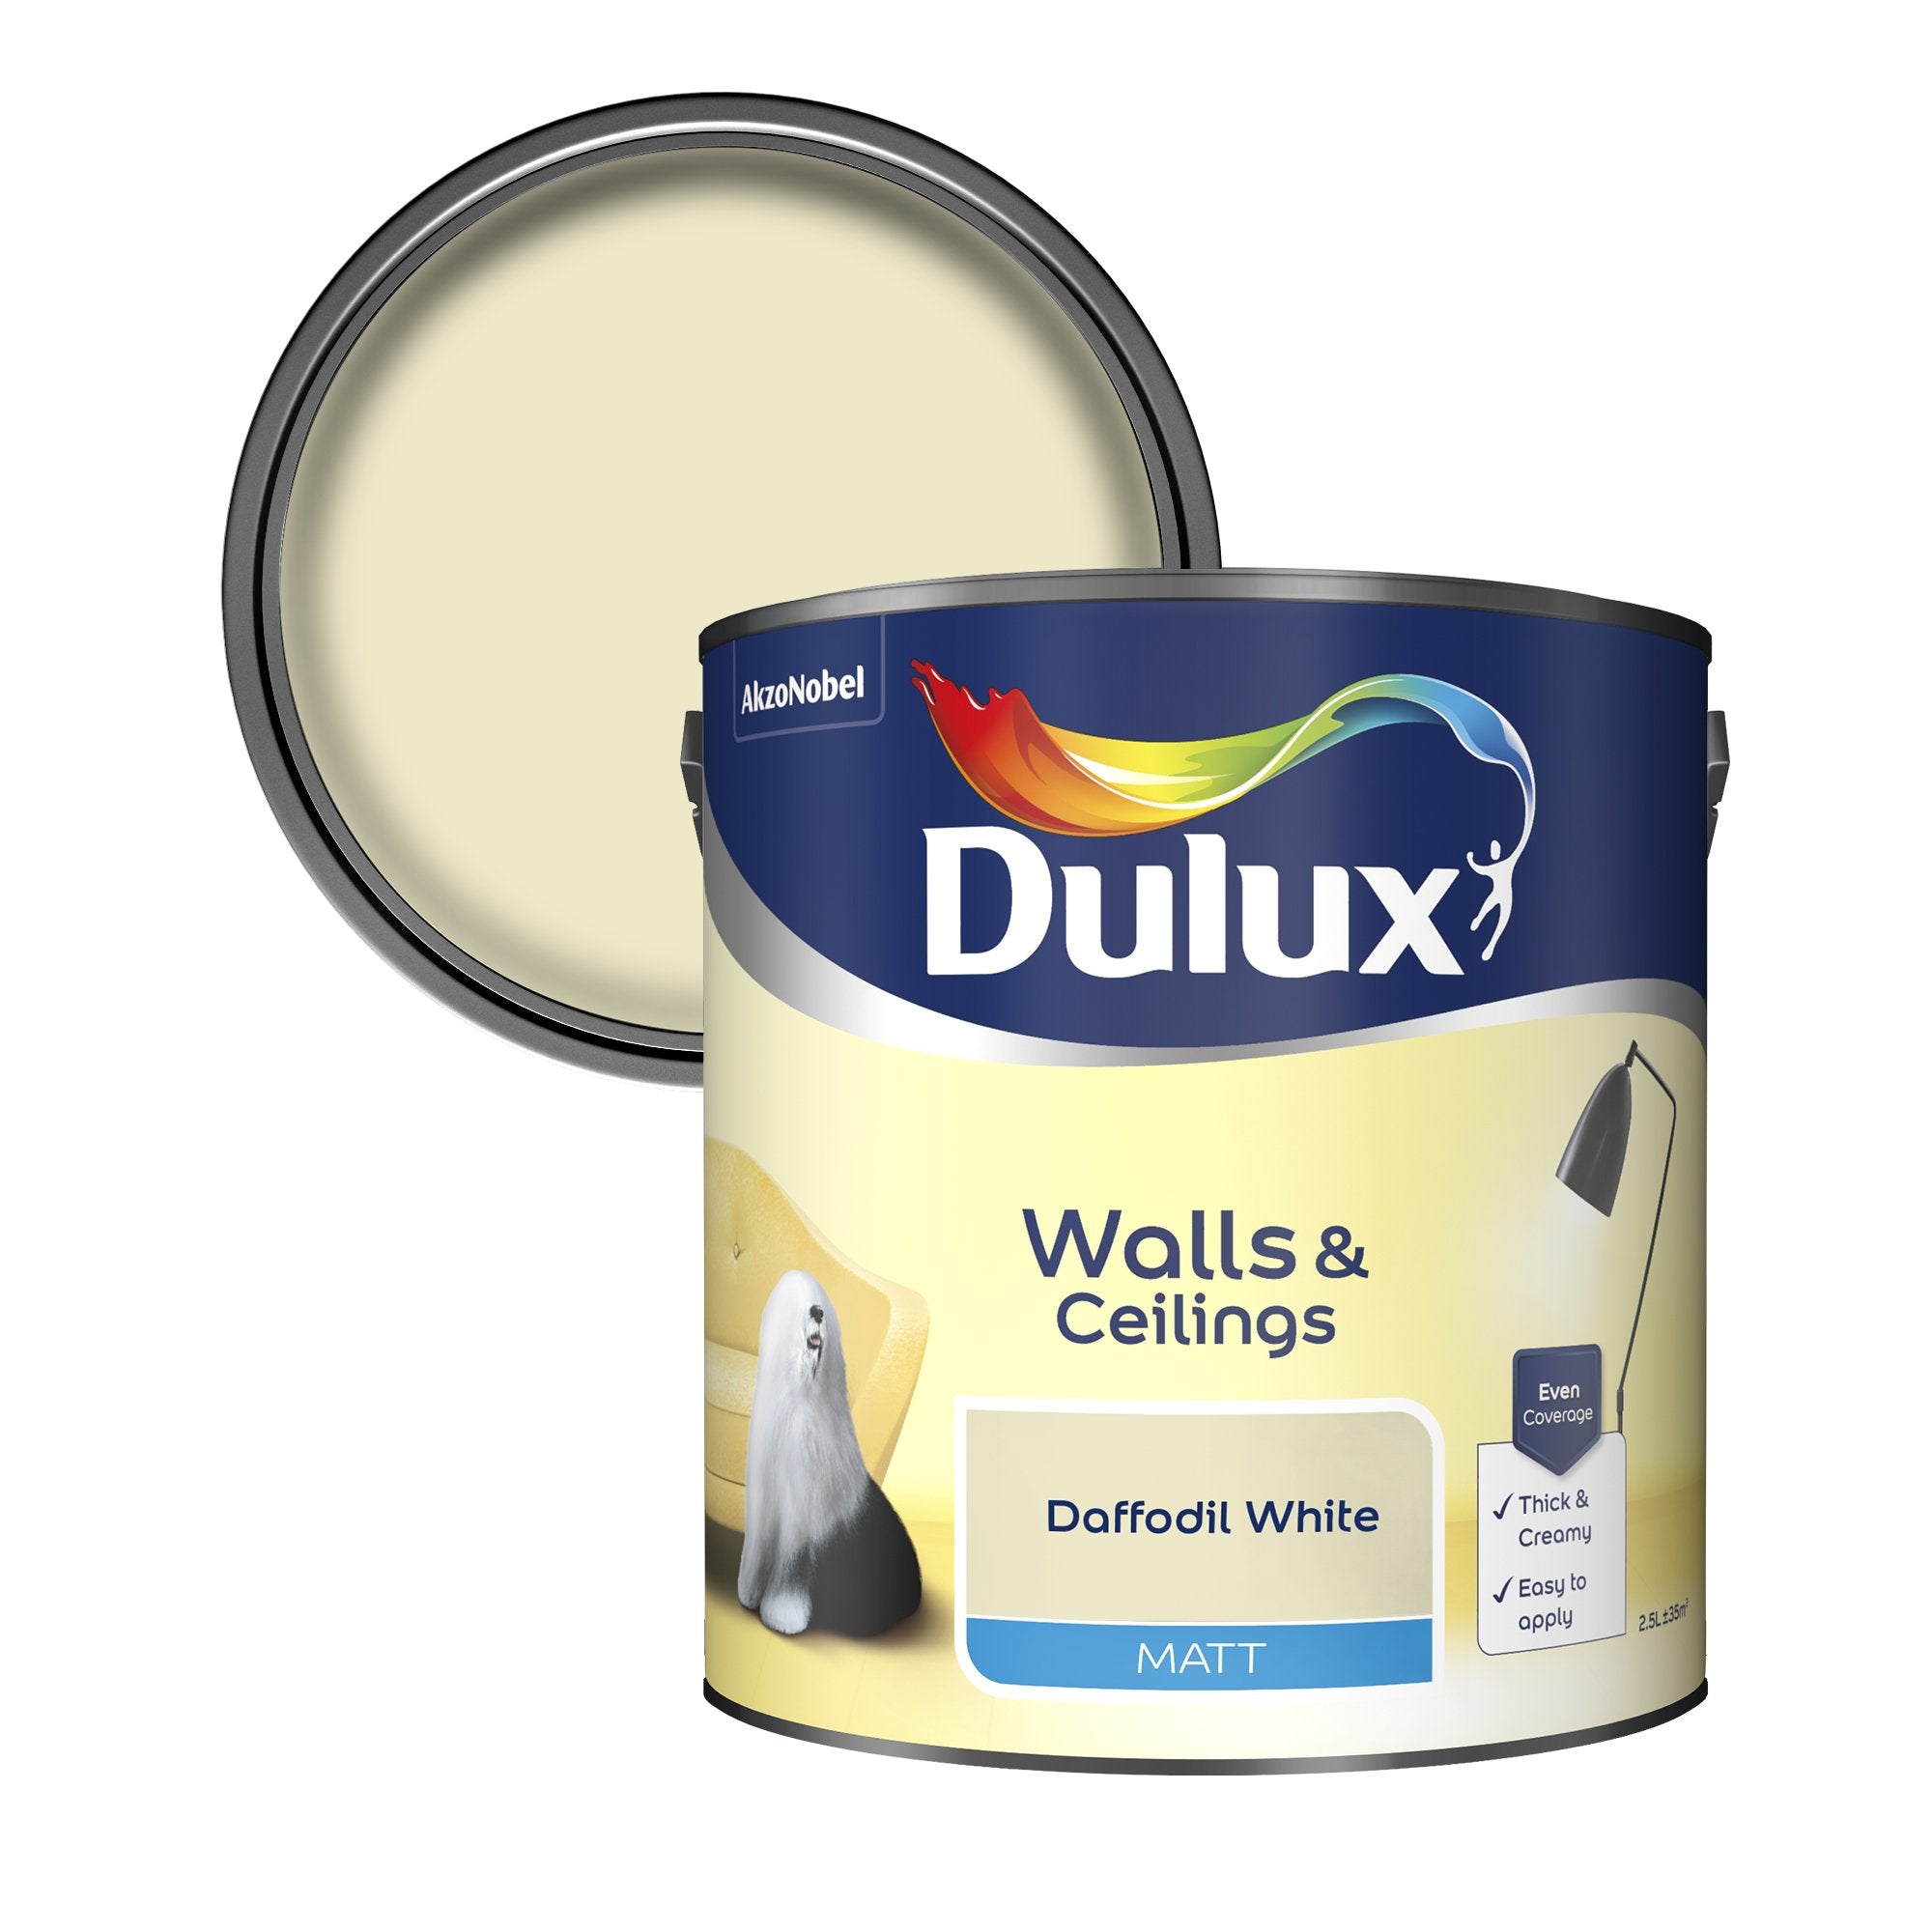 Dulux-Matt-Emulsion-Paint-For-Walls-And-Ceilings-Daffodil-White-2.5L